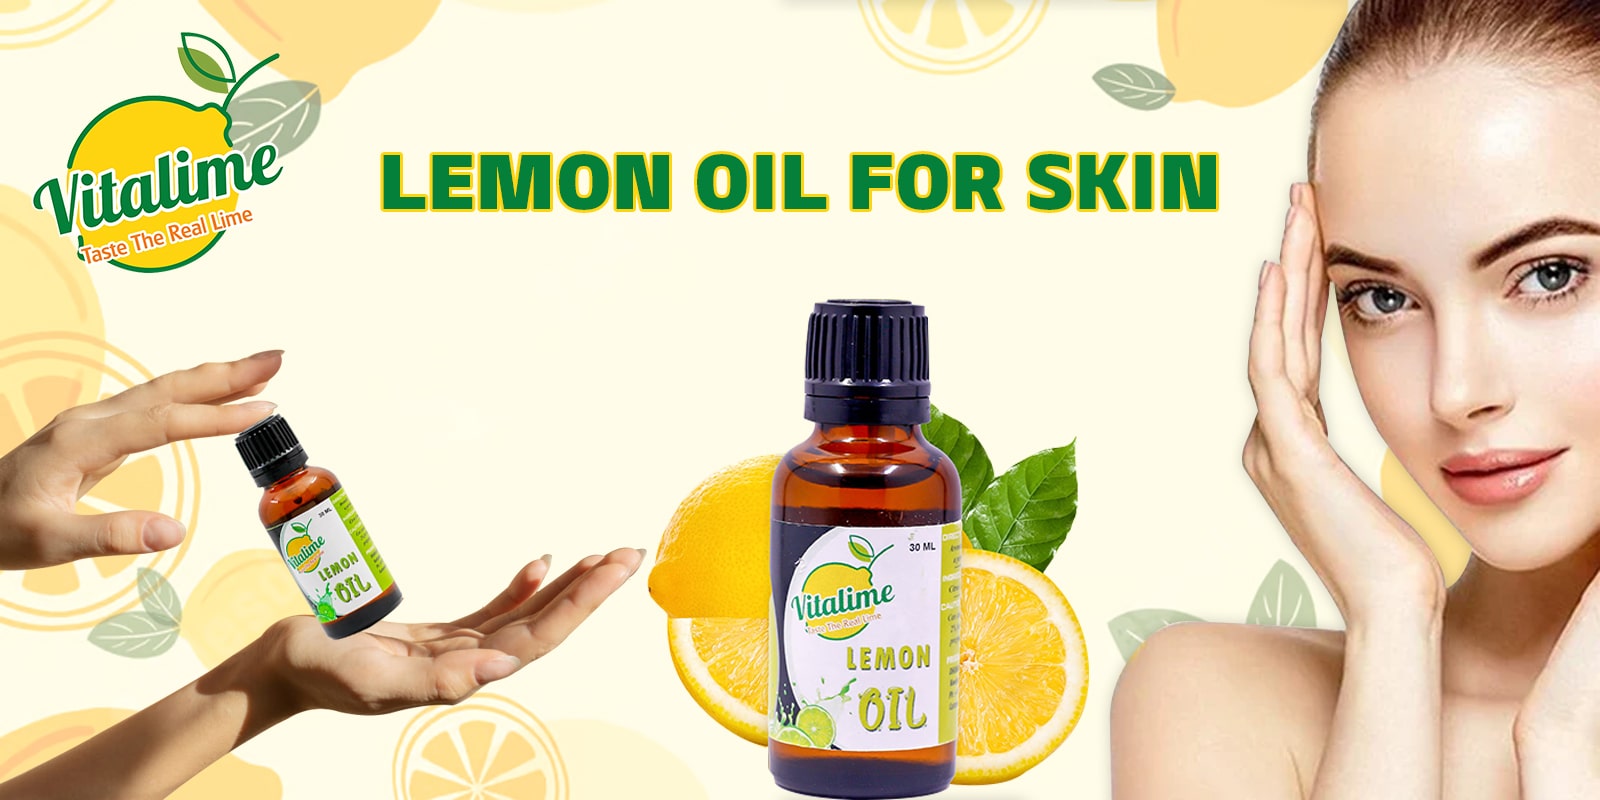 Lemon Oil for Skin: How to Use it for Most Benefits